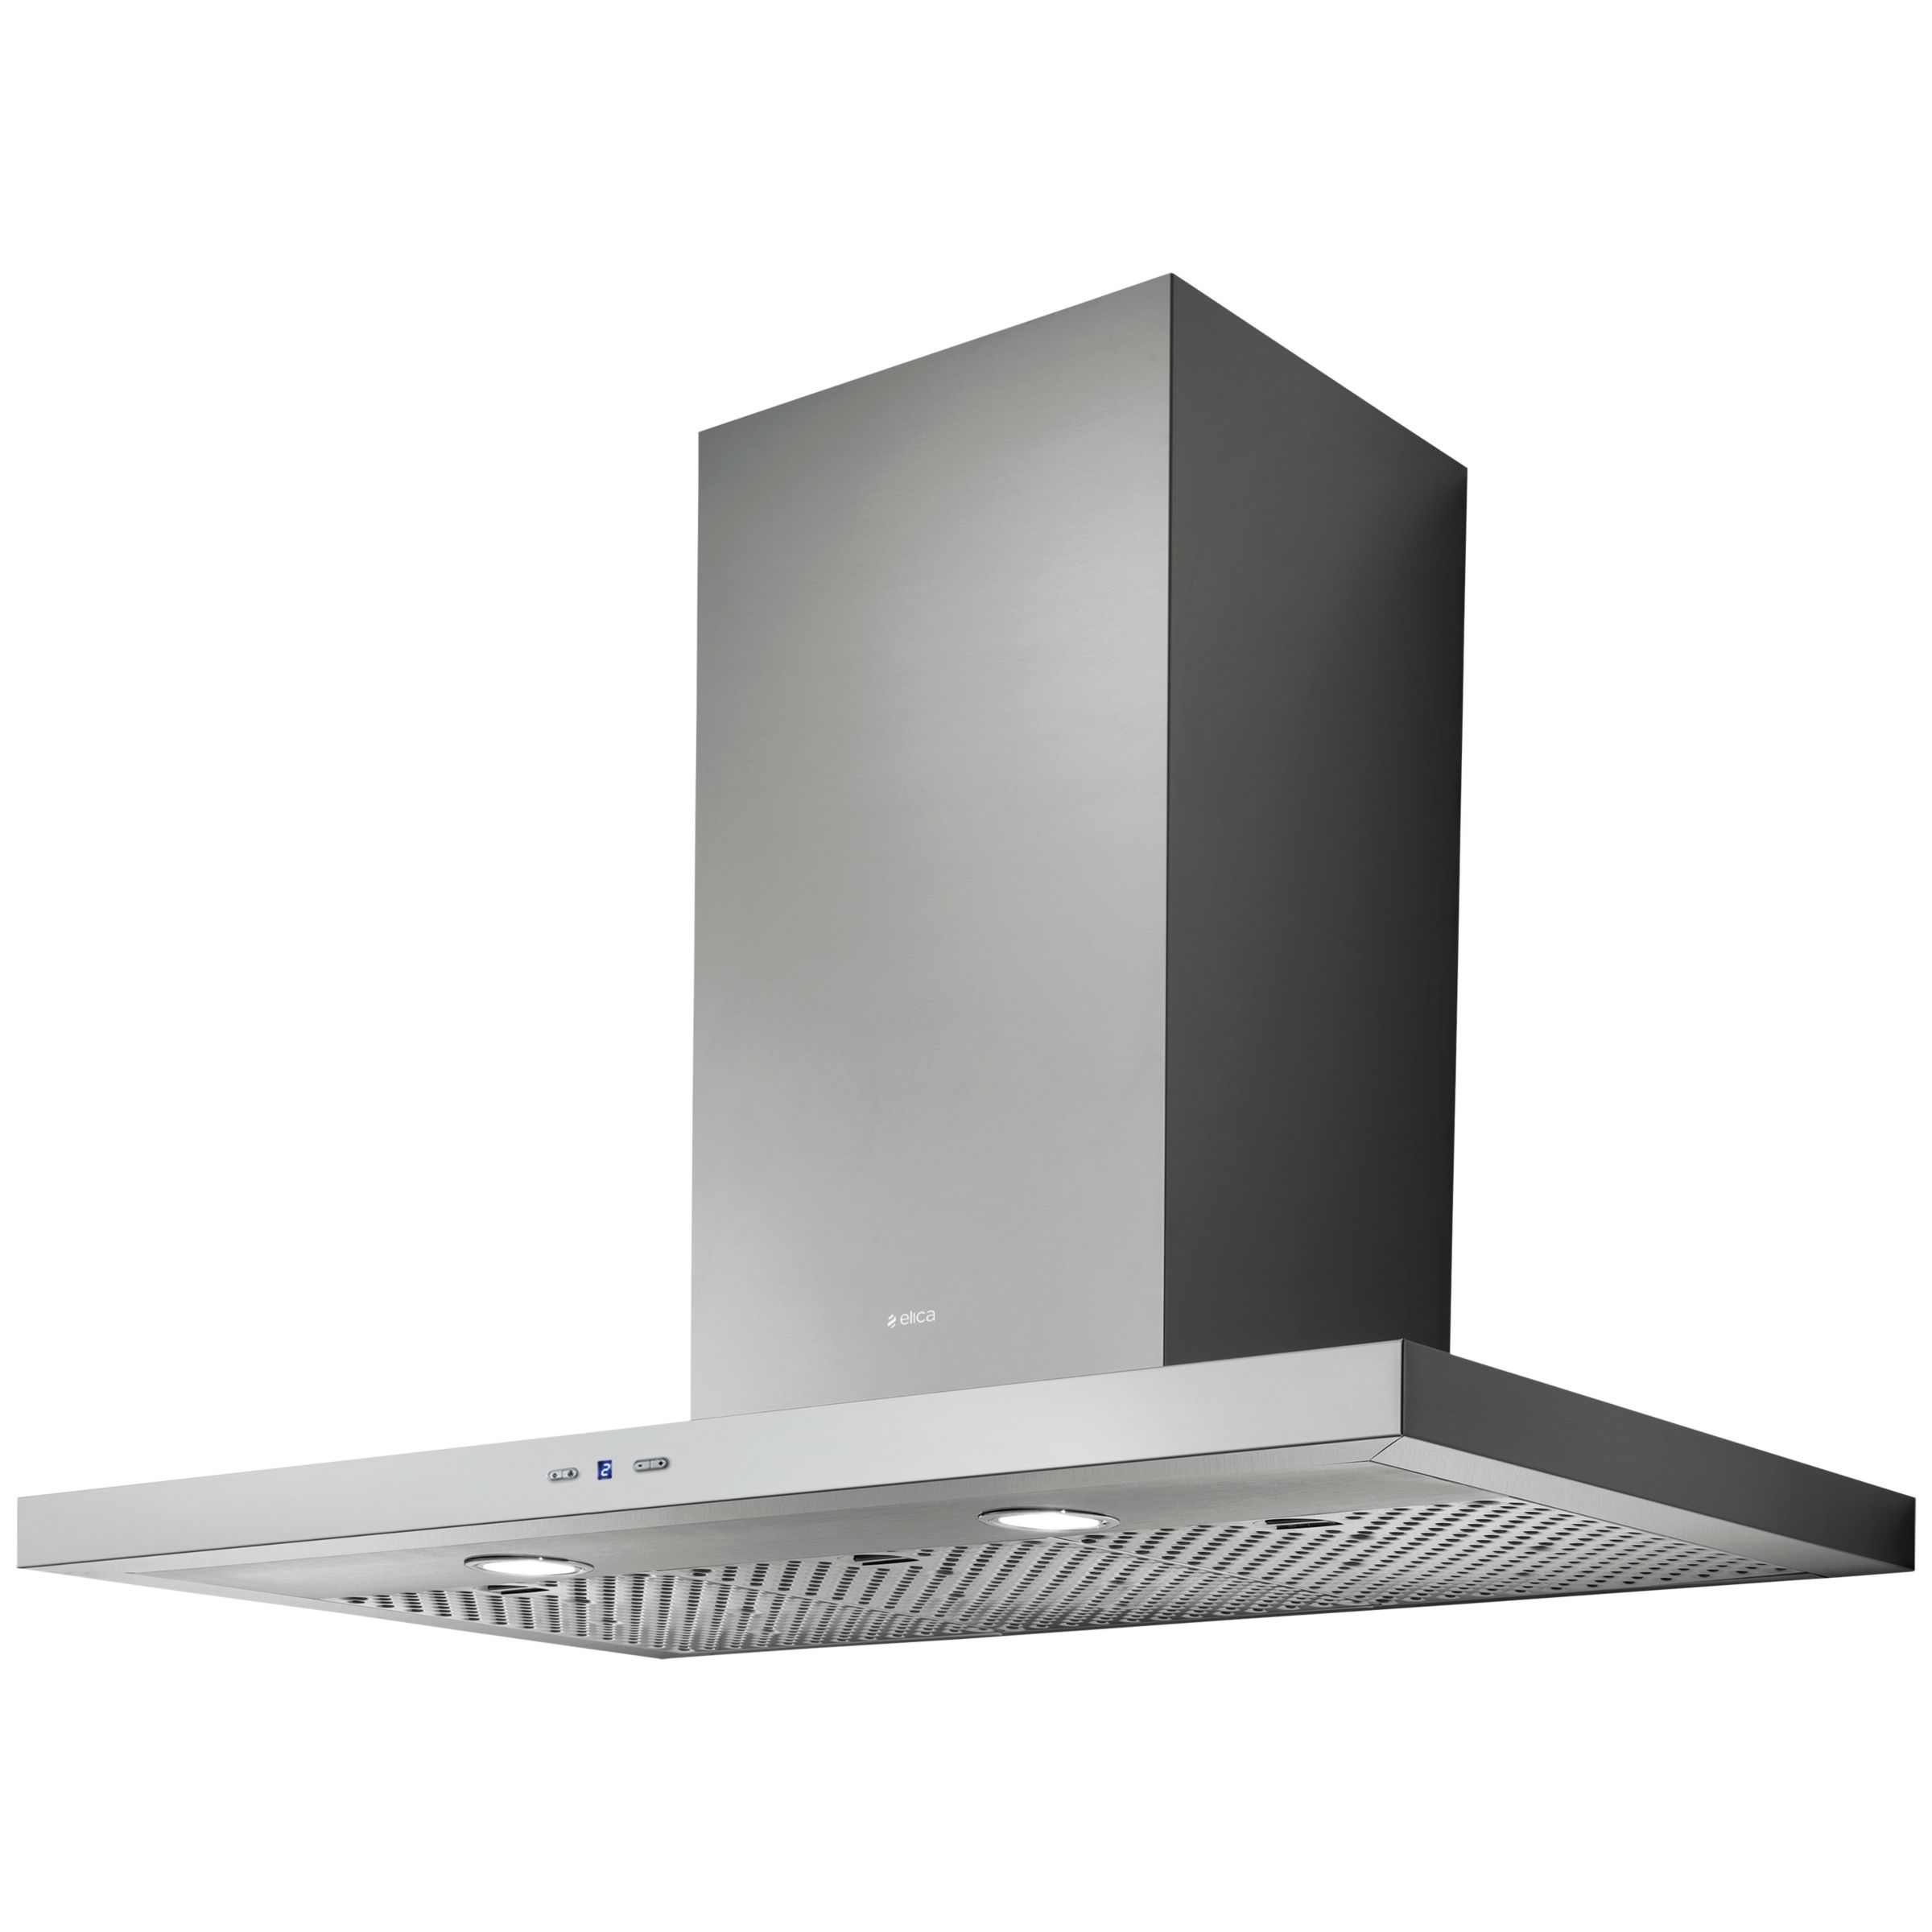 Elica Trendy 90 Iconic Chimney Cooker Hood, Stainless Steel